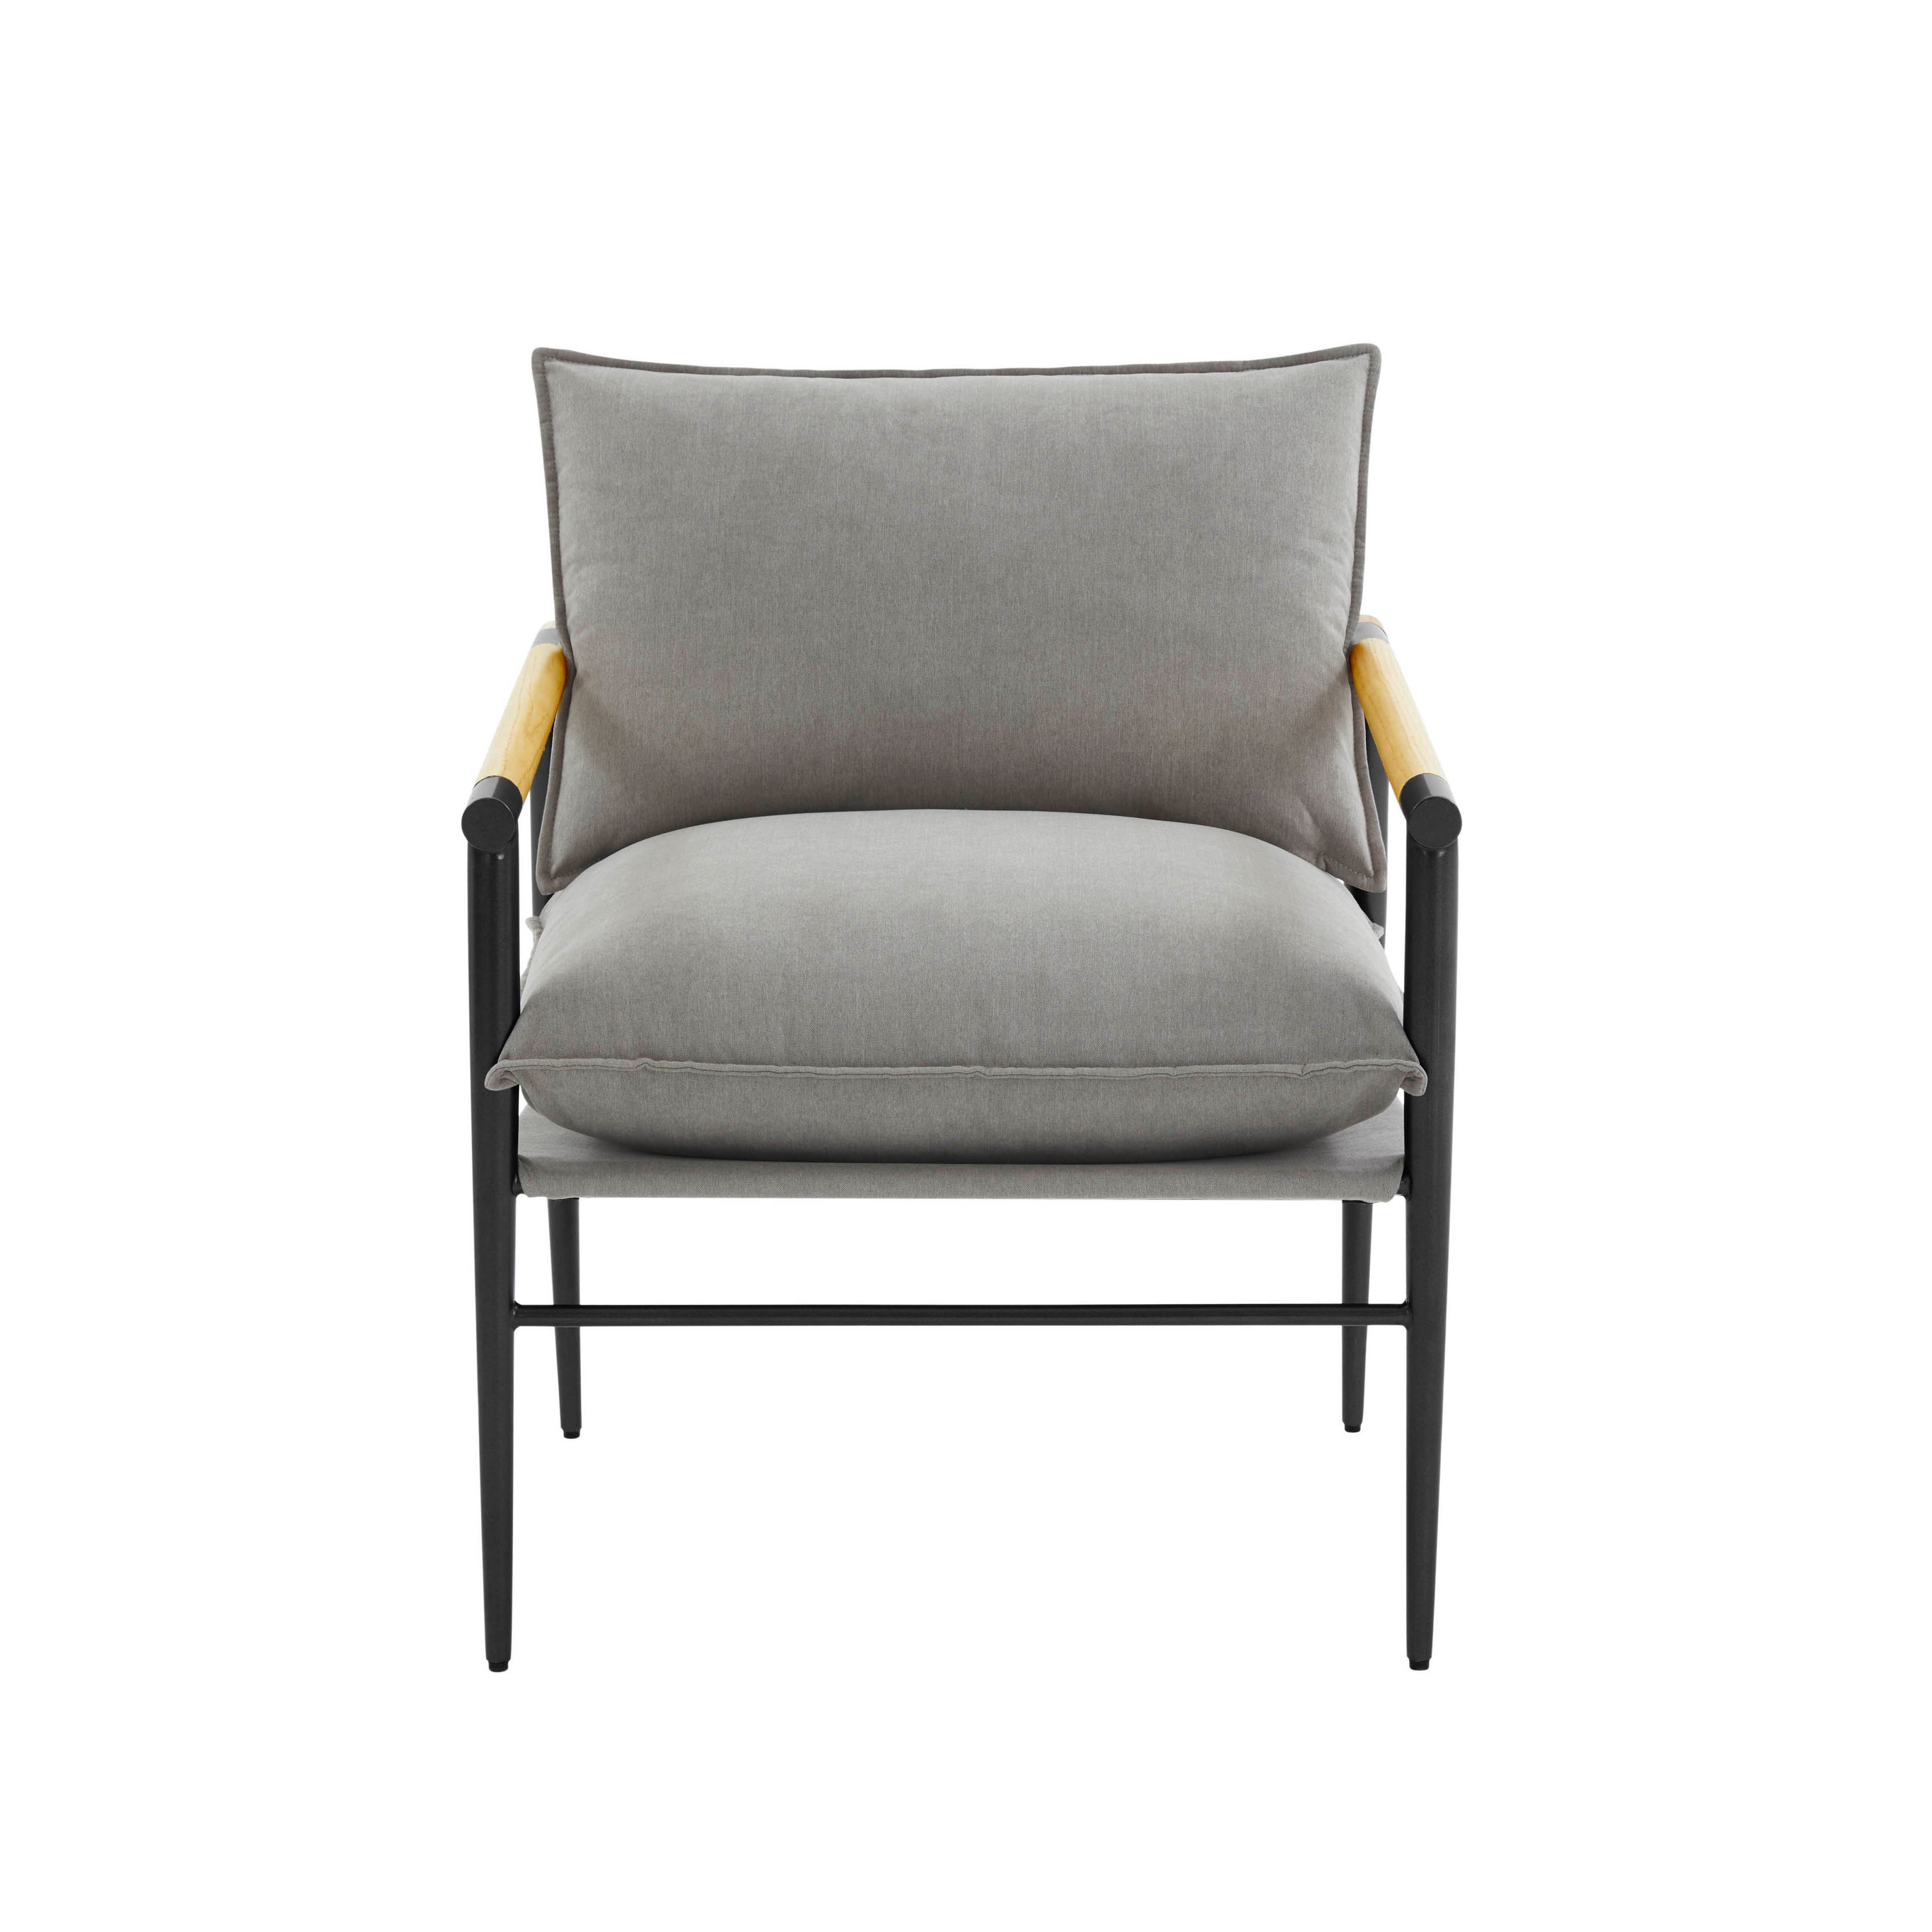 Cali Slate Accent Chair - Image 2